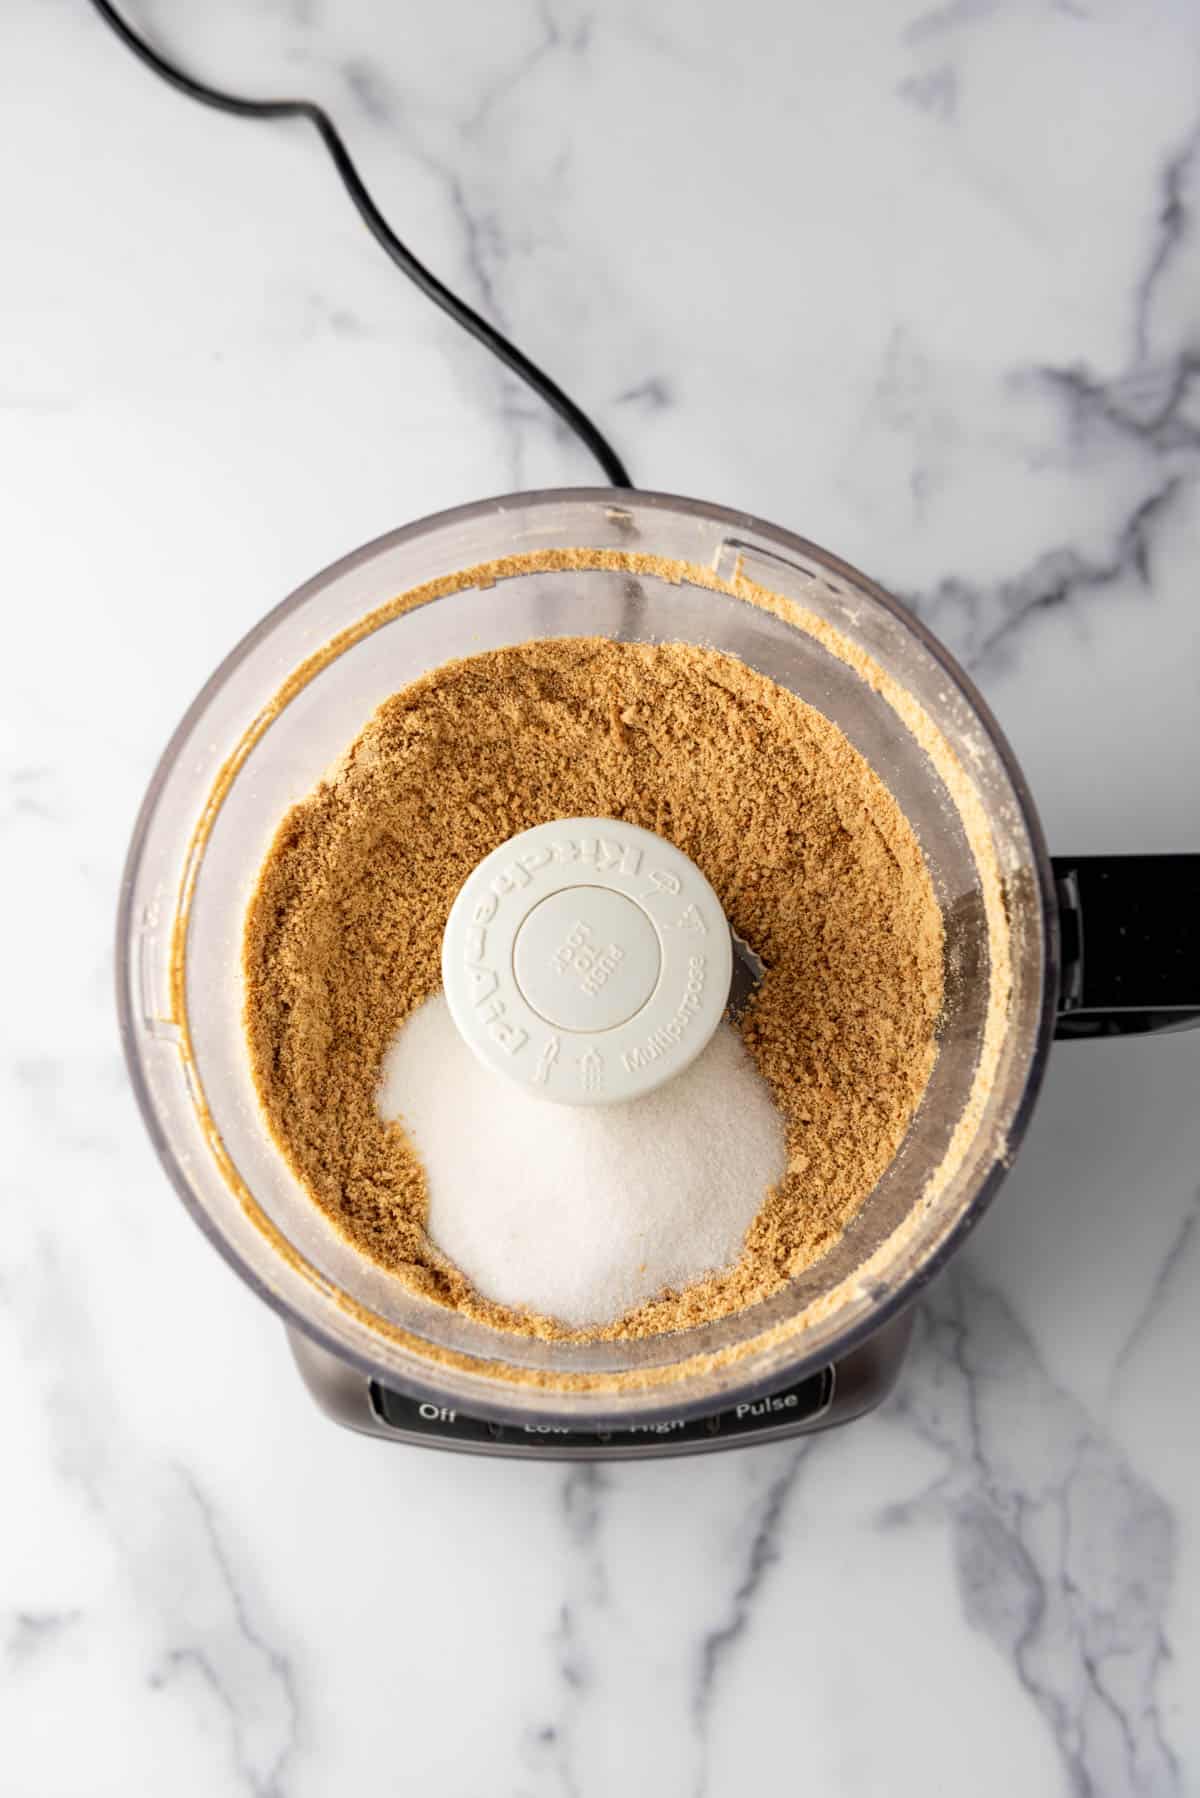 Combining crushed graham cracker crumbs and sugar in a food processor.